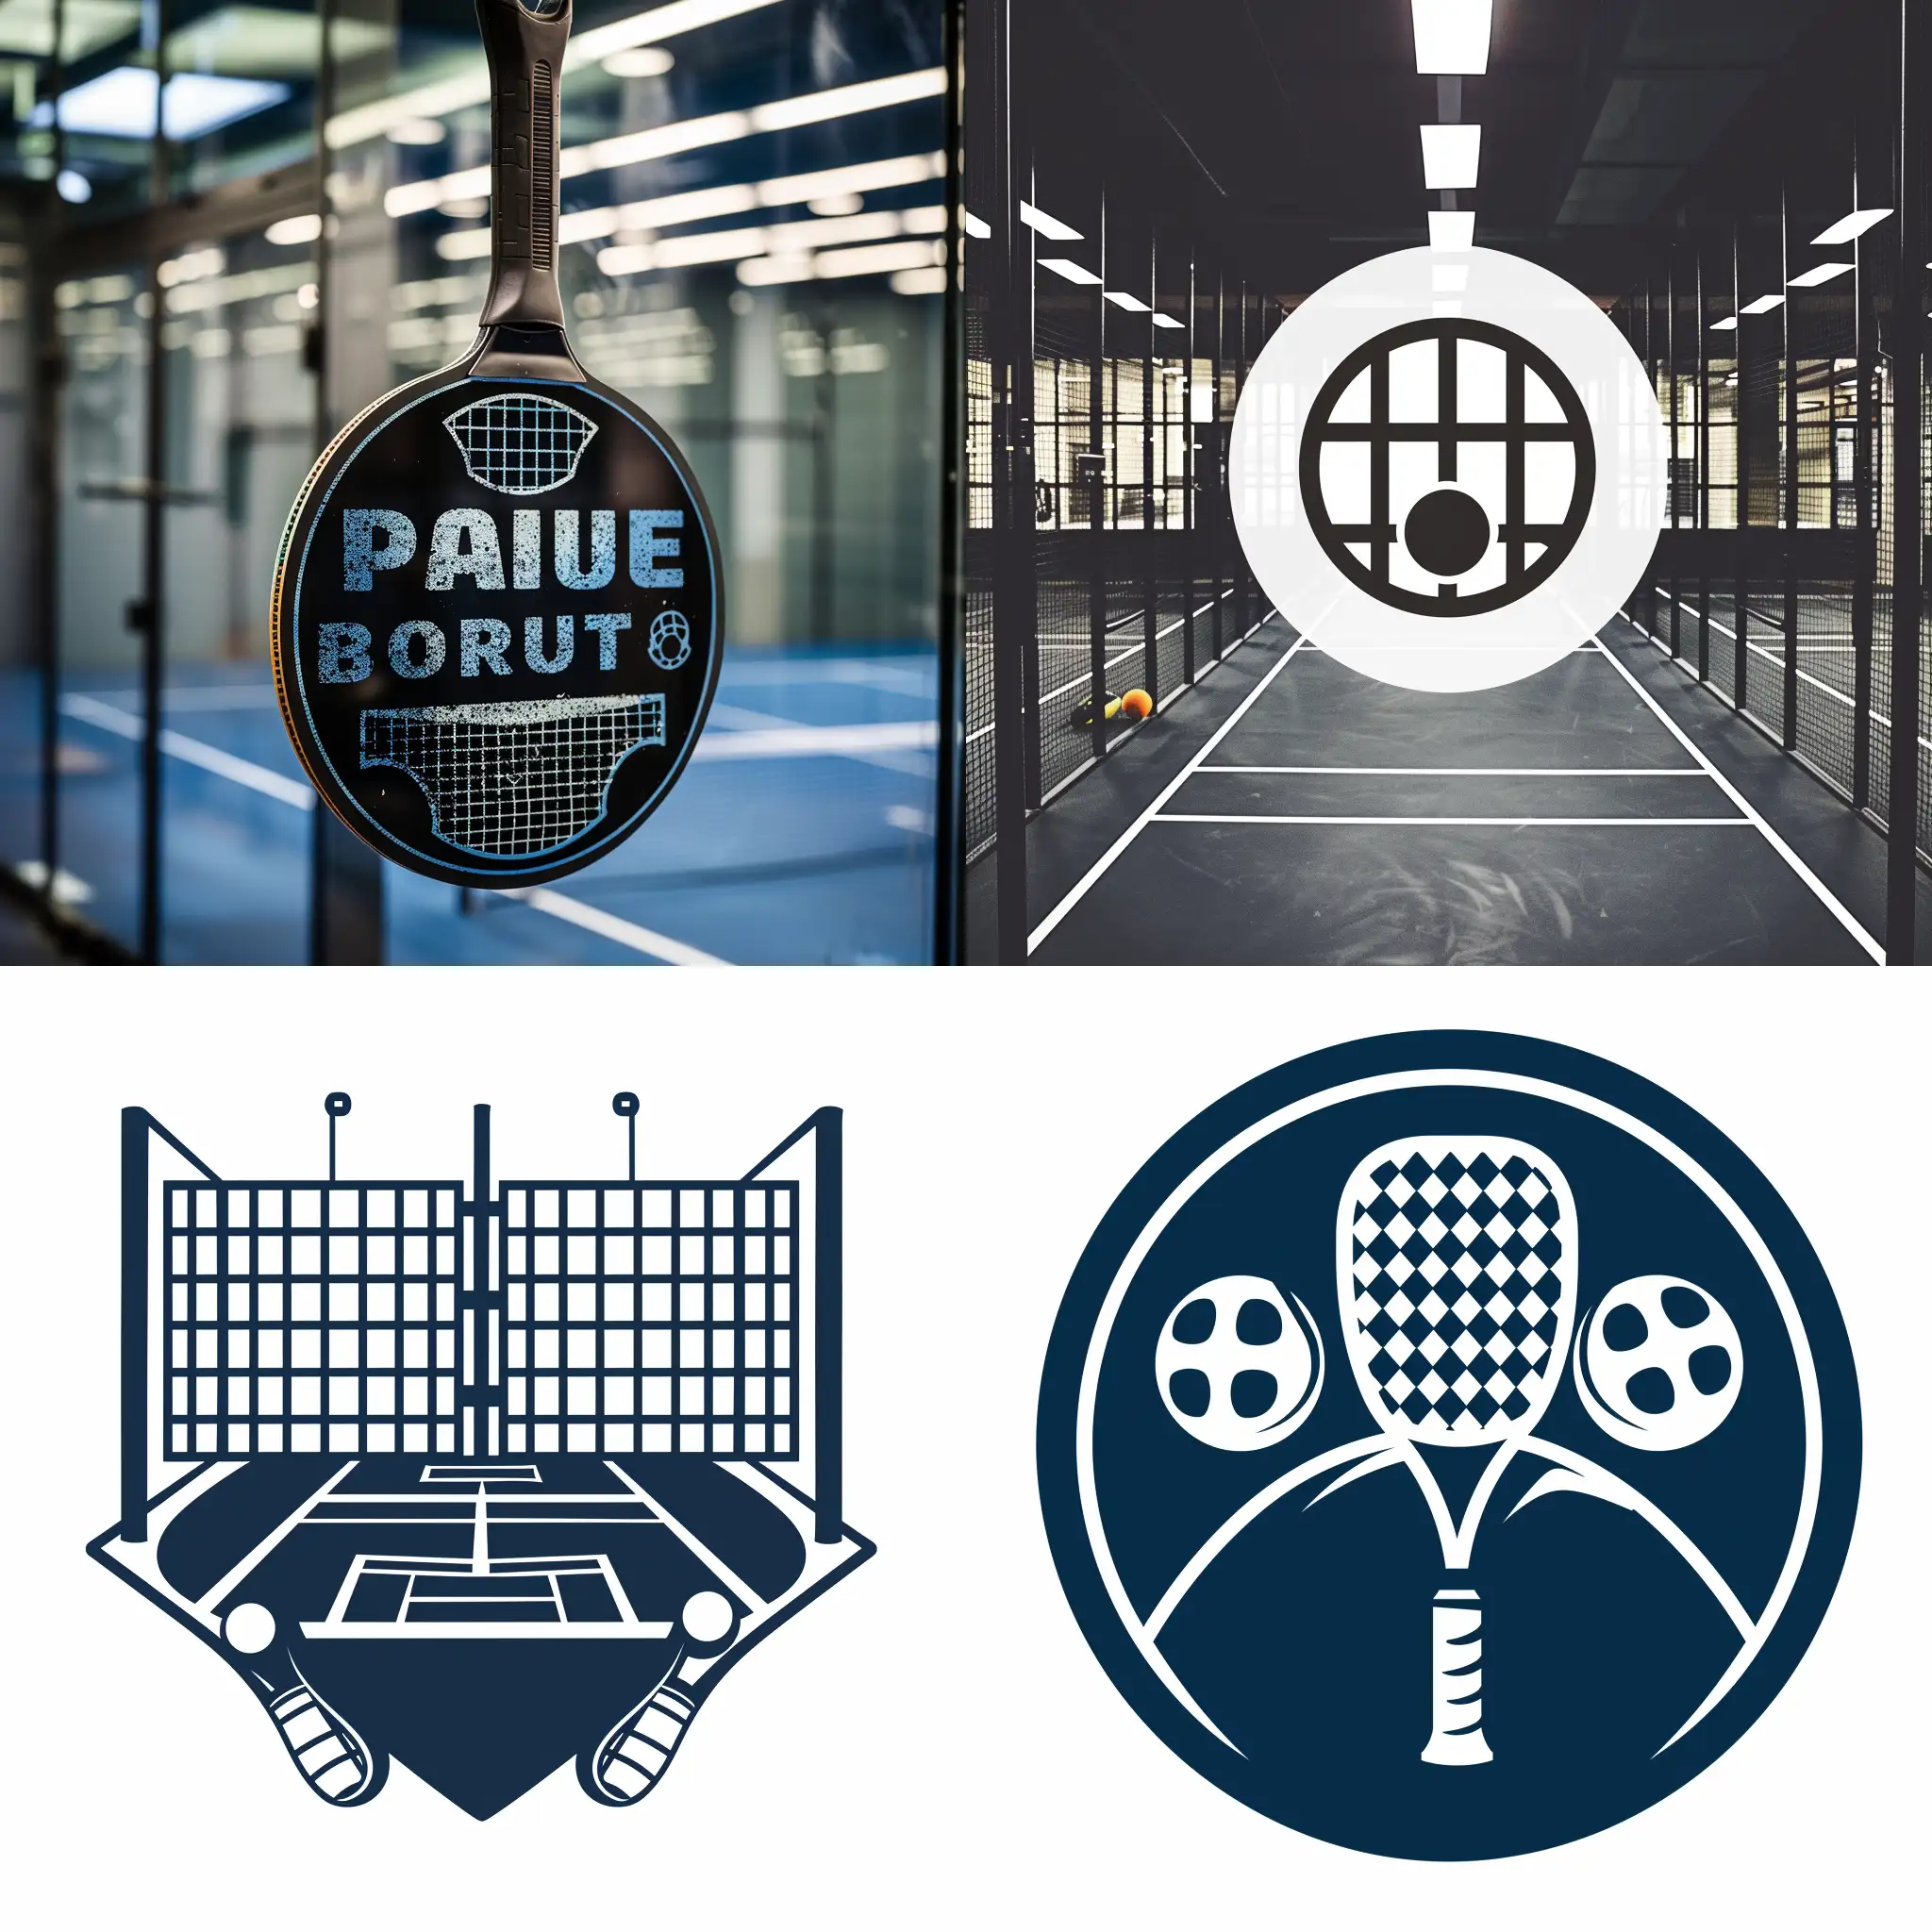 Vibrant-Padel-Court-Logo-with-6-Players-in-a-11-Aspect-Ratio